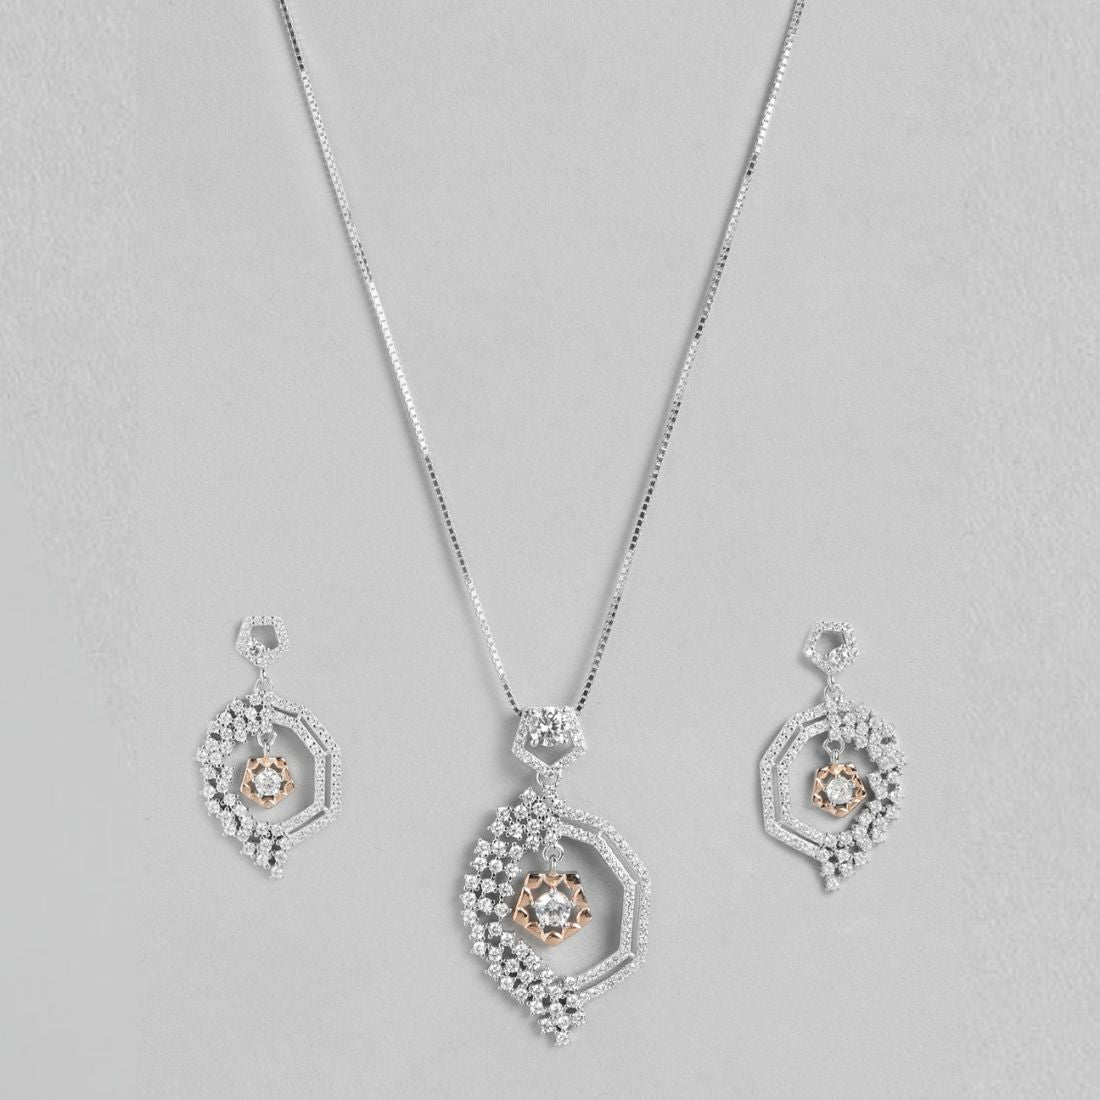 Dual Radiance Brilliance Dual Tone-Plated 925 Sterling Silver Jewelry Set